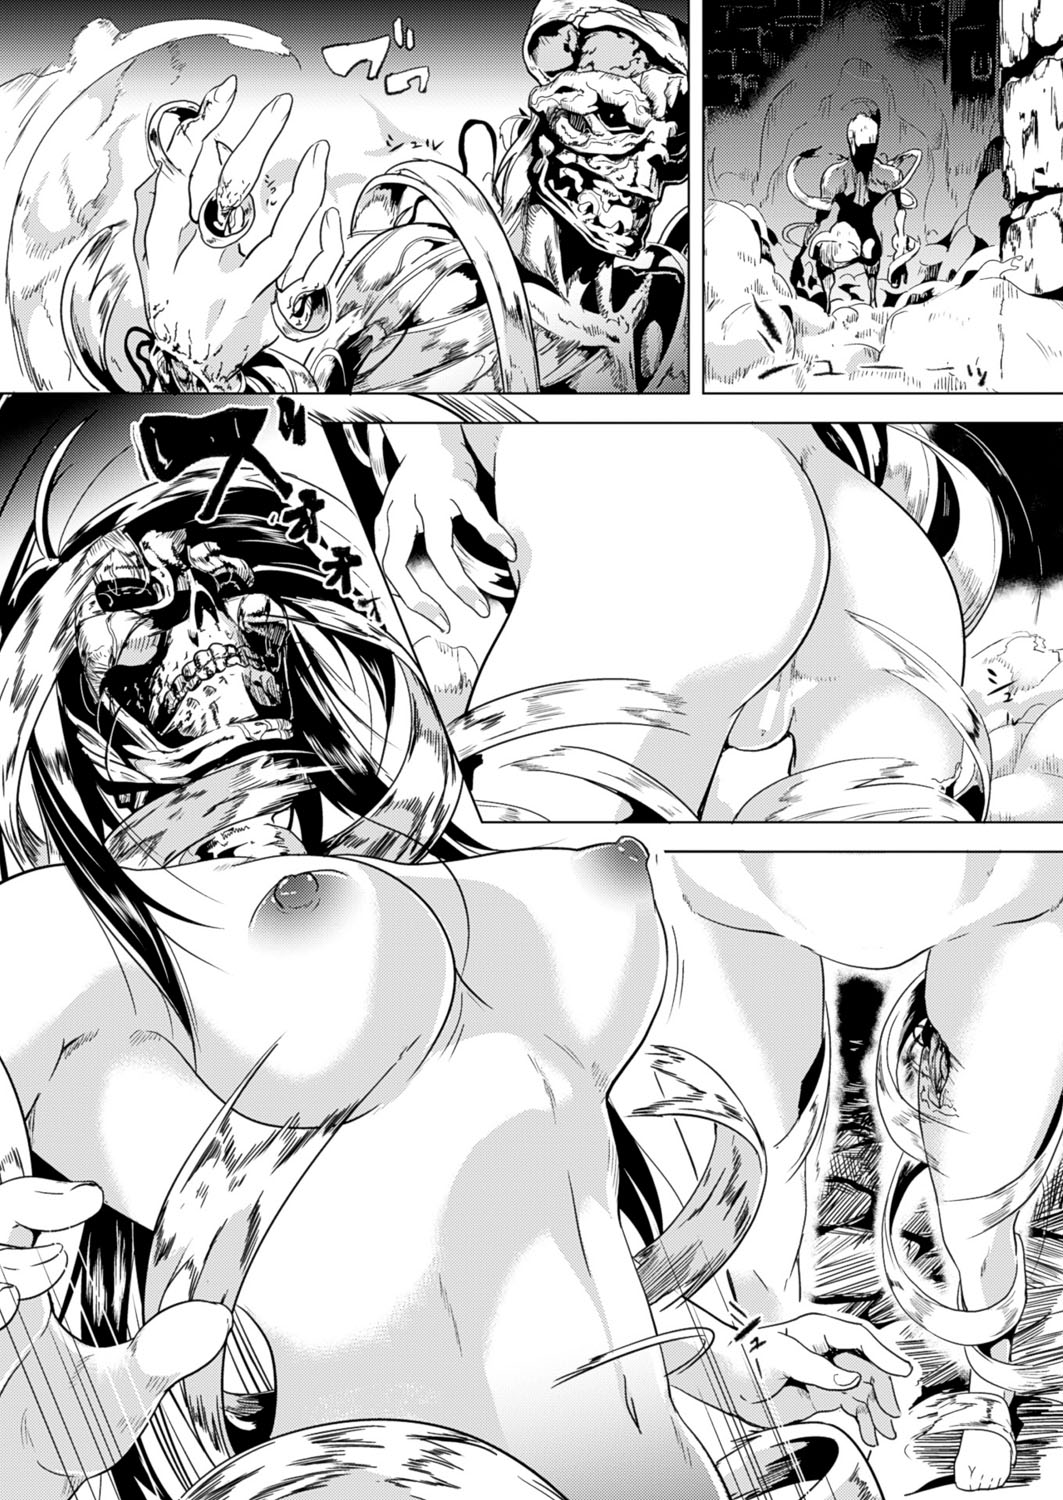 [DATE] OGRE #2 (COMIC Unreal 2016-12 Vol. 64) [Chinese] [風過迴廊個人漢化] [Digital] page 12 full